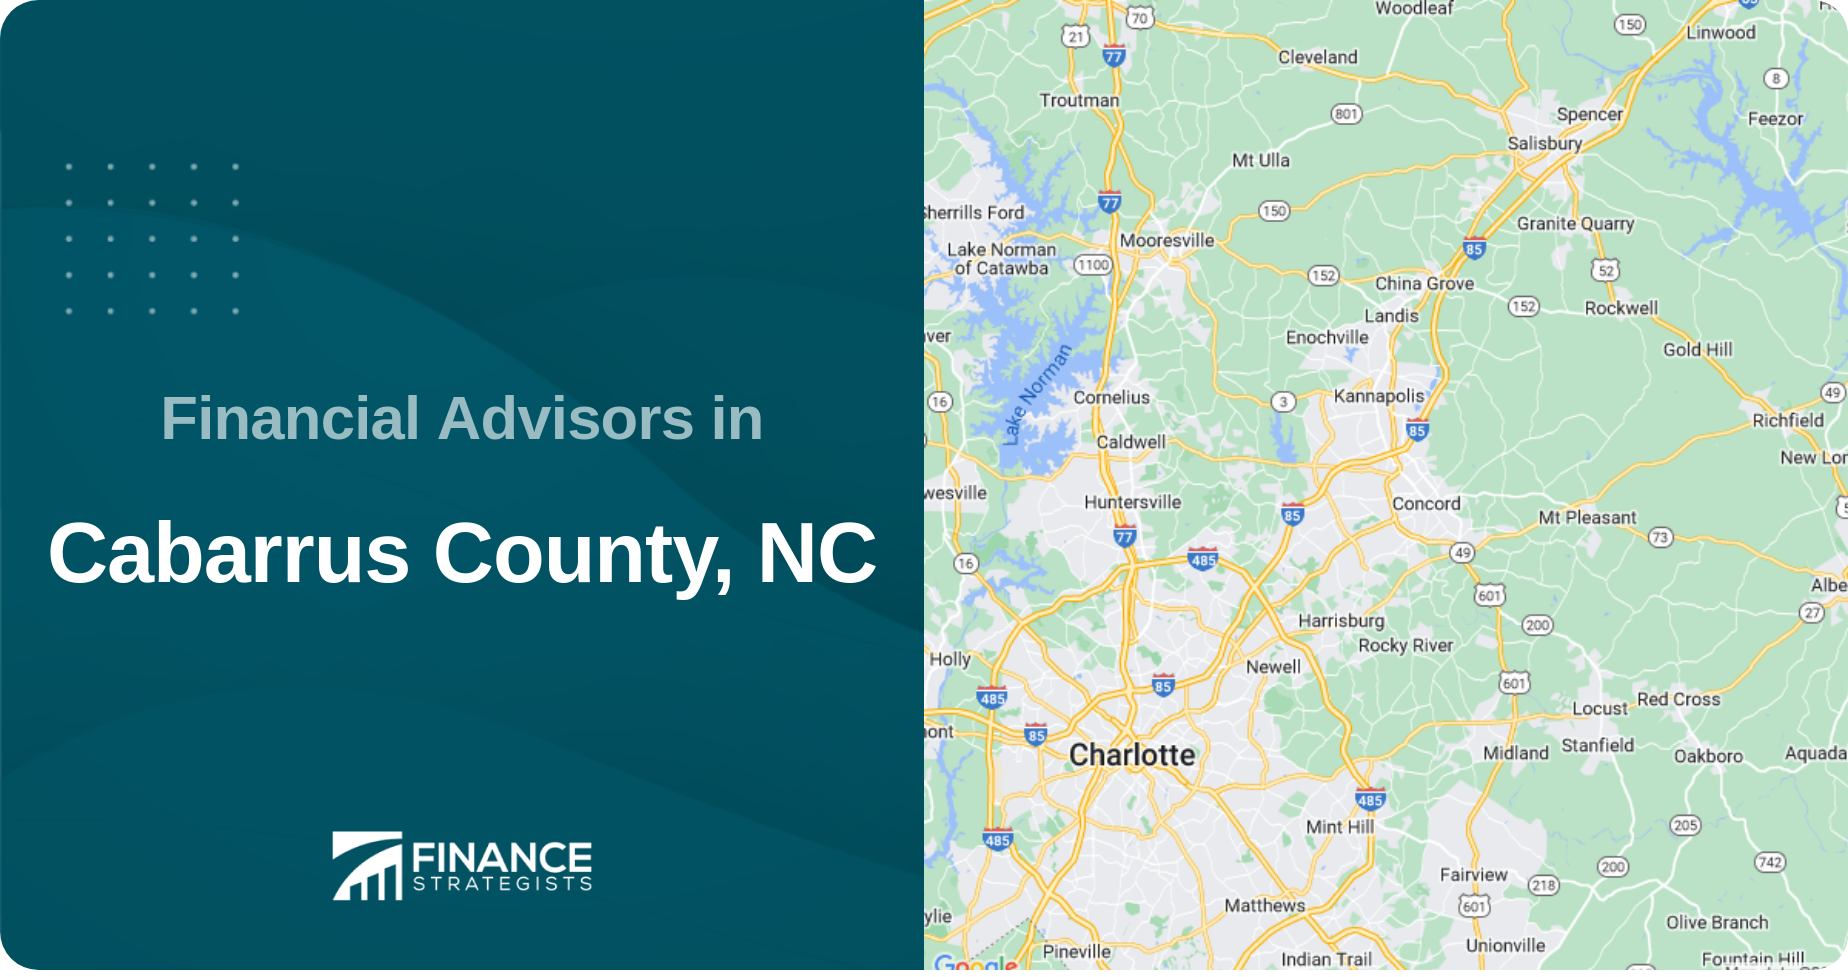 Financial Advisors in Cabarrus County, NC